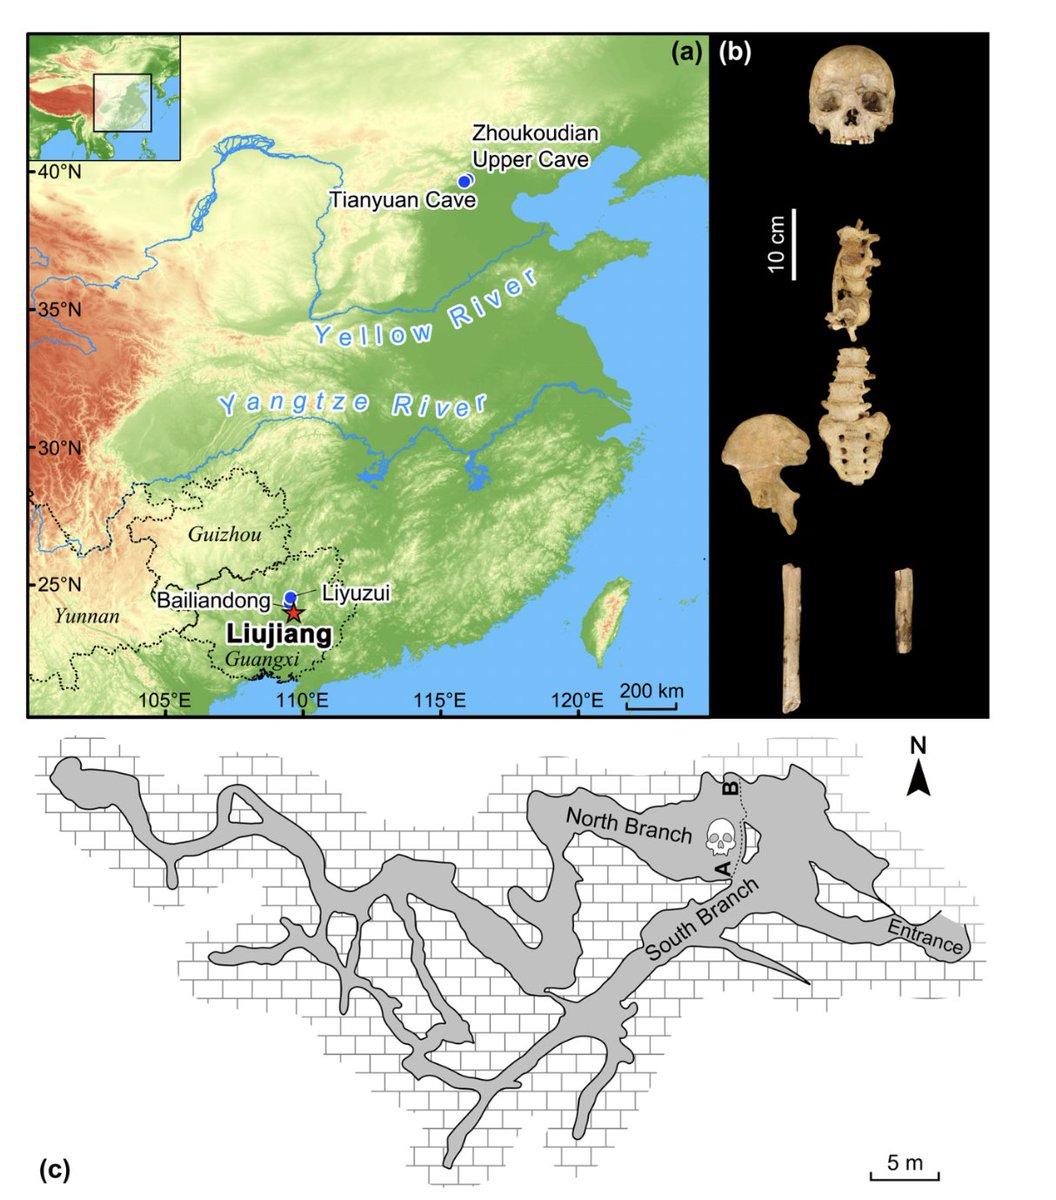 2/ The age estimates correspond with the dates of other human fossils in northern China, at Tianyuan Cave (~40.8–38.1 ka) and Zhoukoudian Upper Cave (39.0–36.3 ka), indicating the geographically widespread presence of H. sapiens across Eastern Asia in the Late Pleistocene